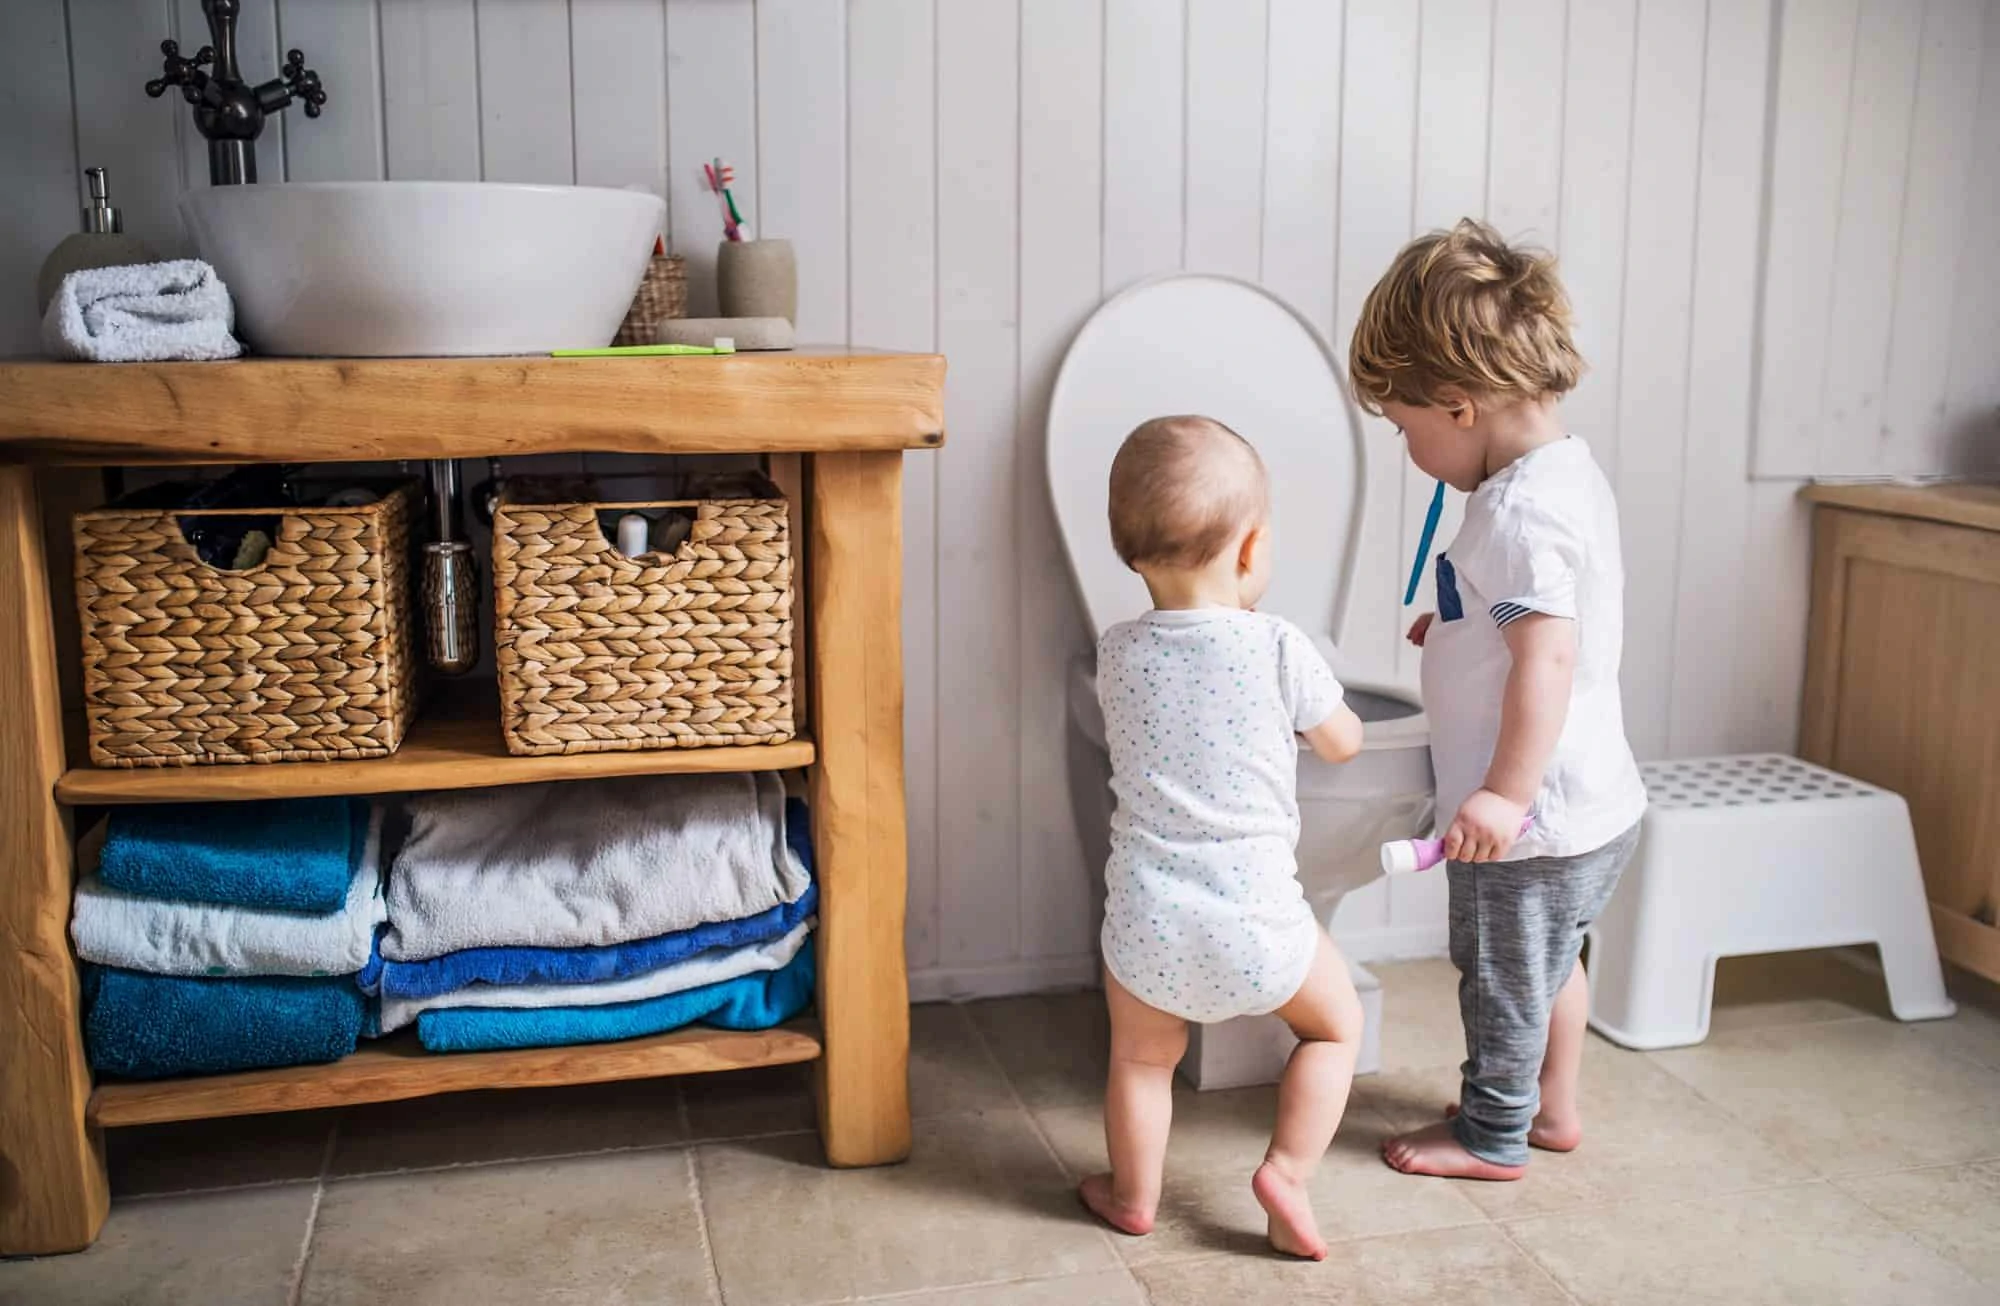 Two toddler children with toothbrush standing by the toilet in the bathroom at home.